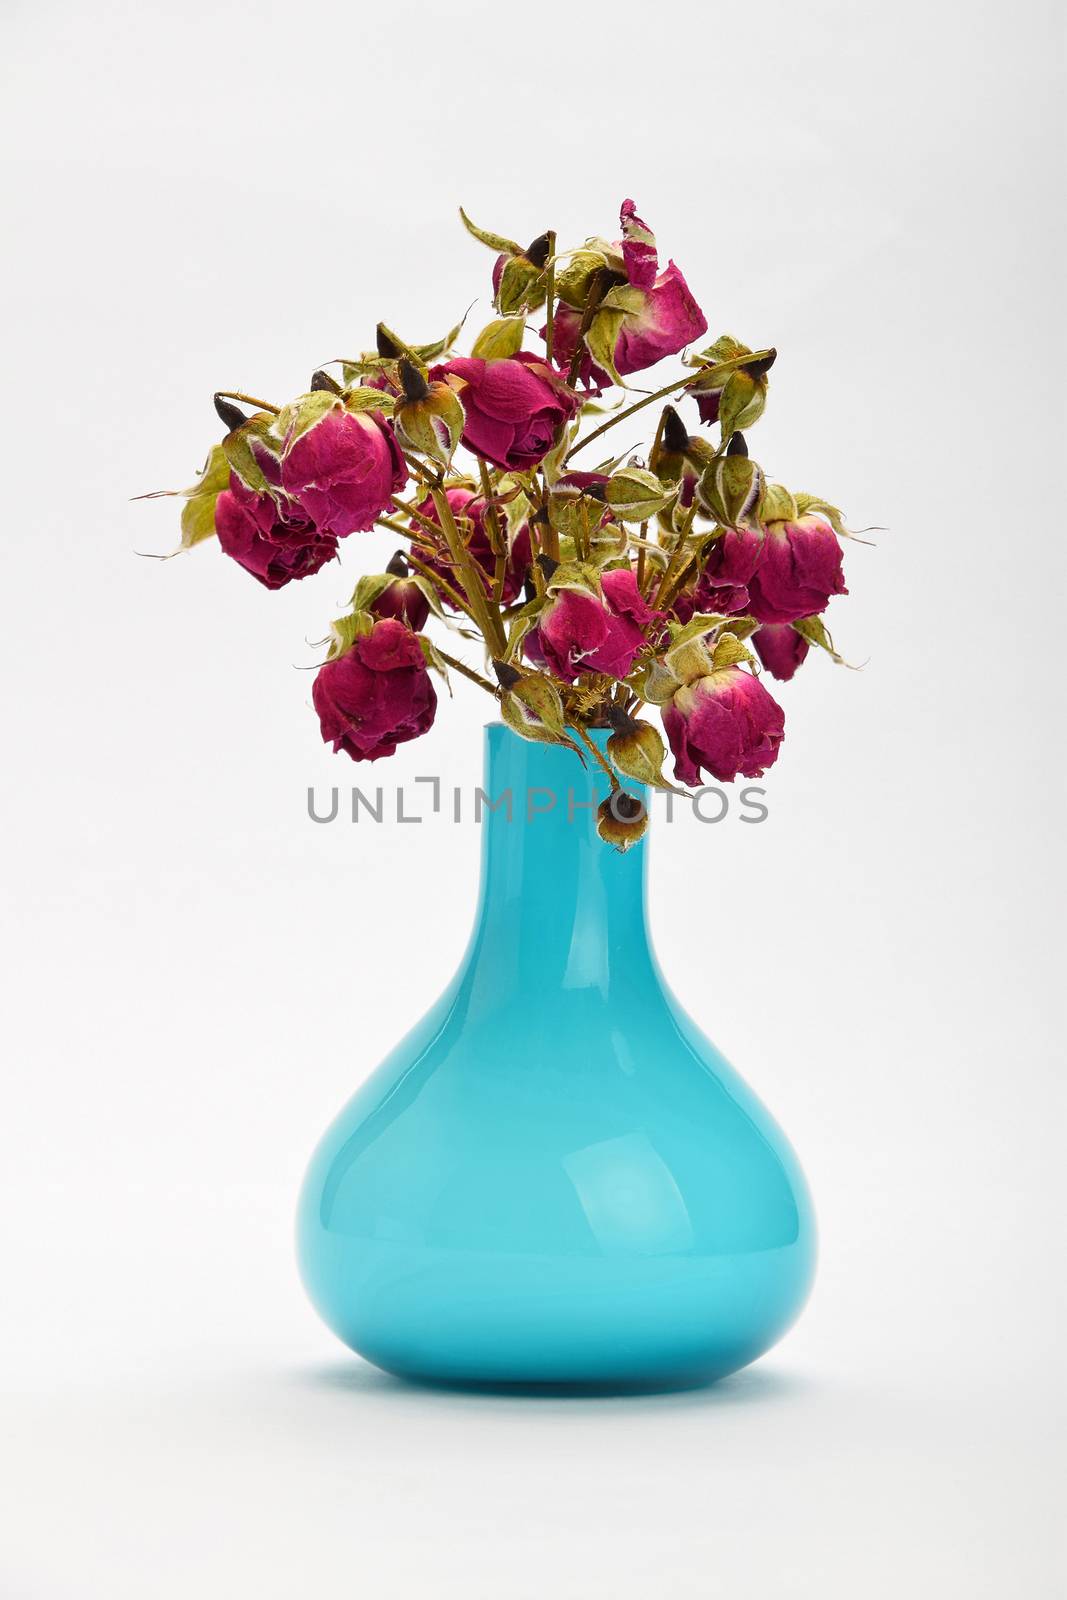 Dried-up red roses in a blue vase on white background with shade